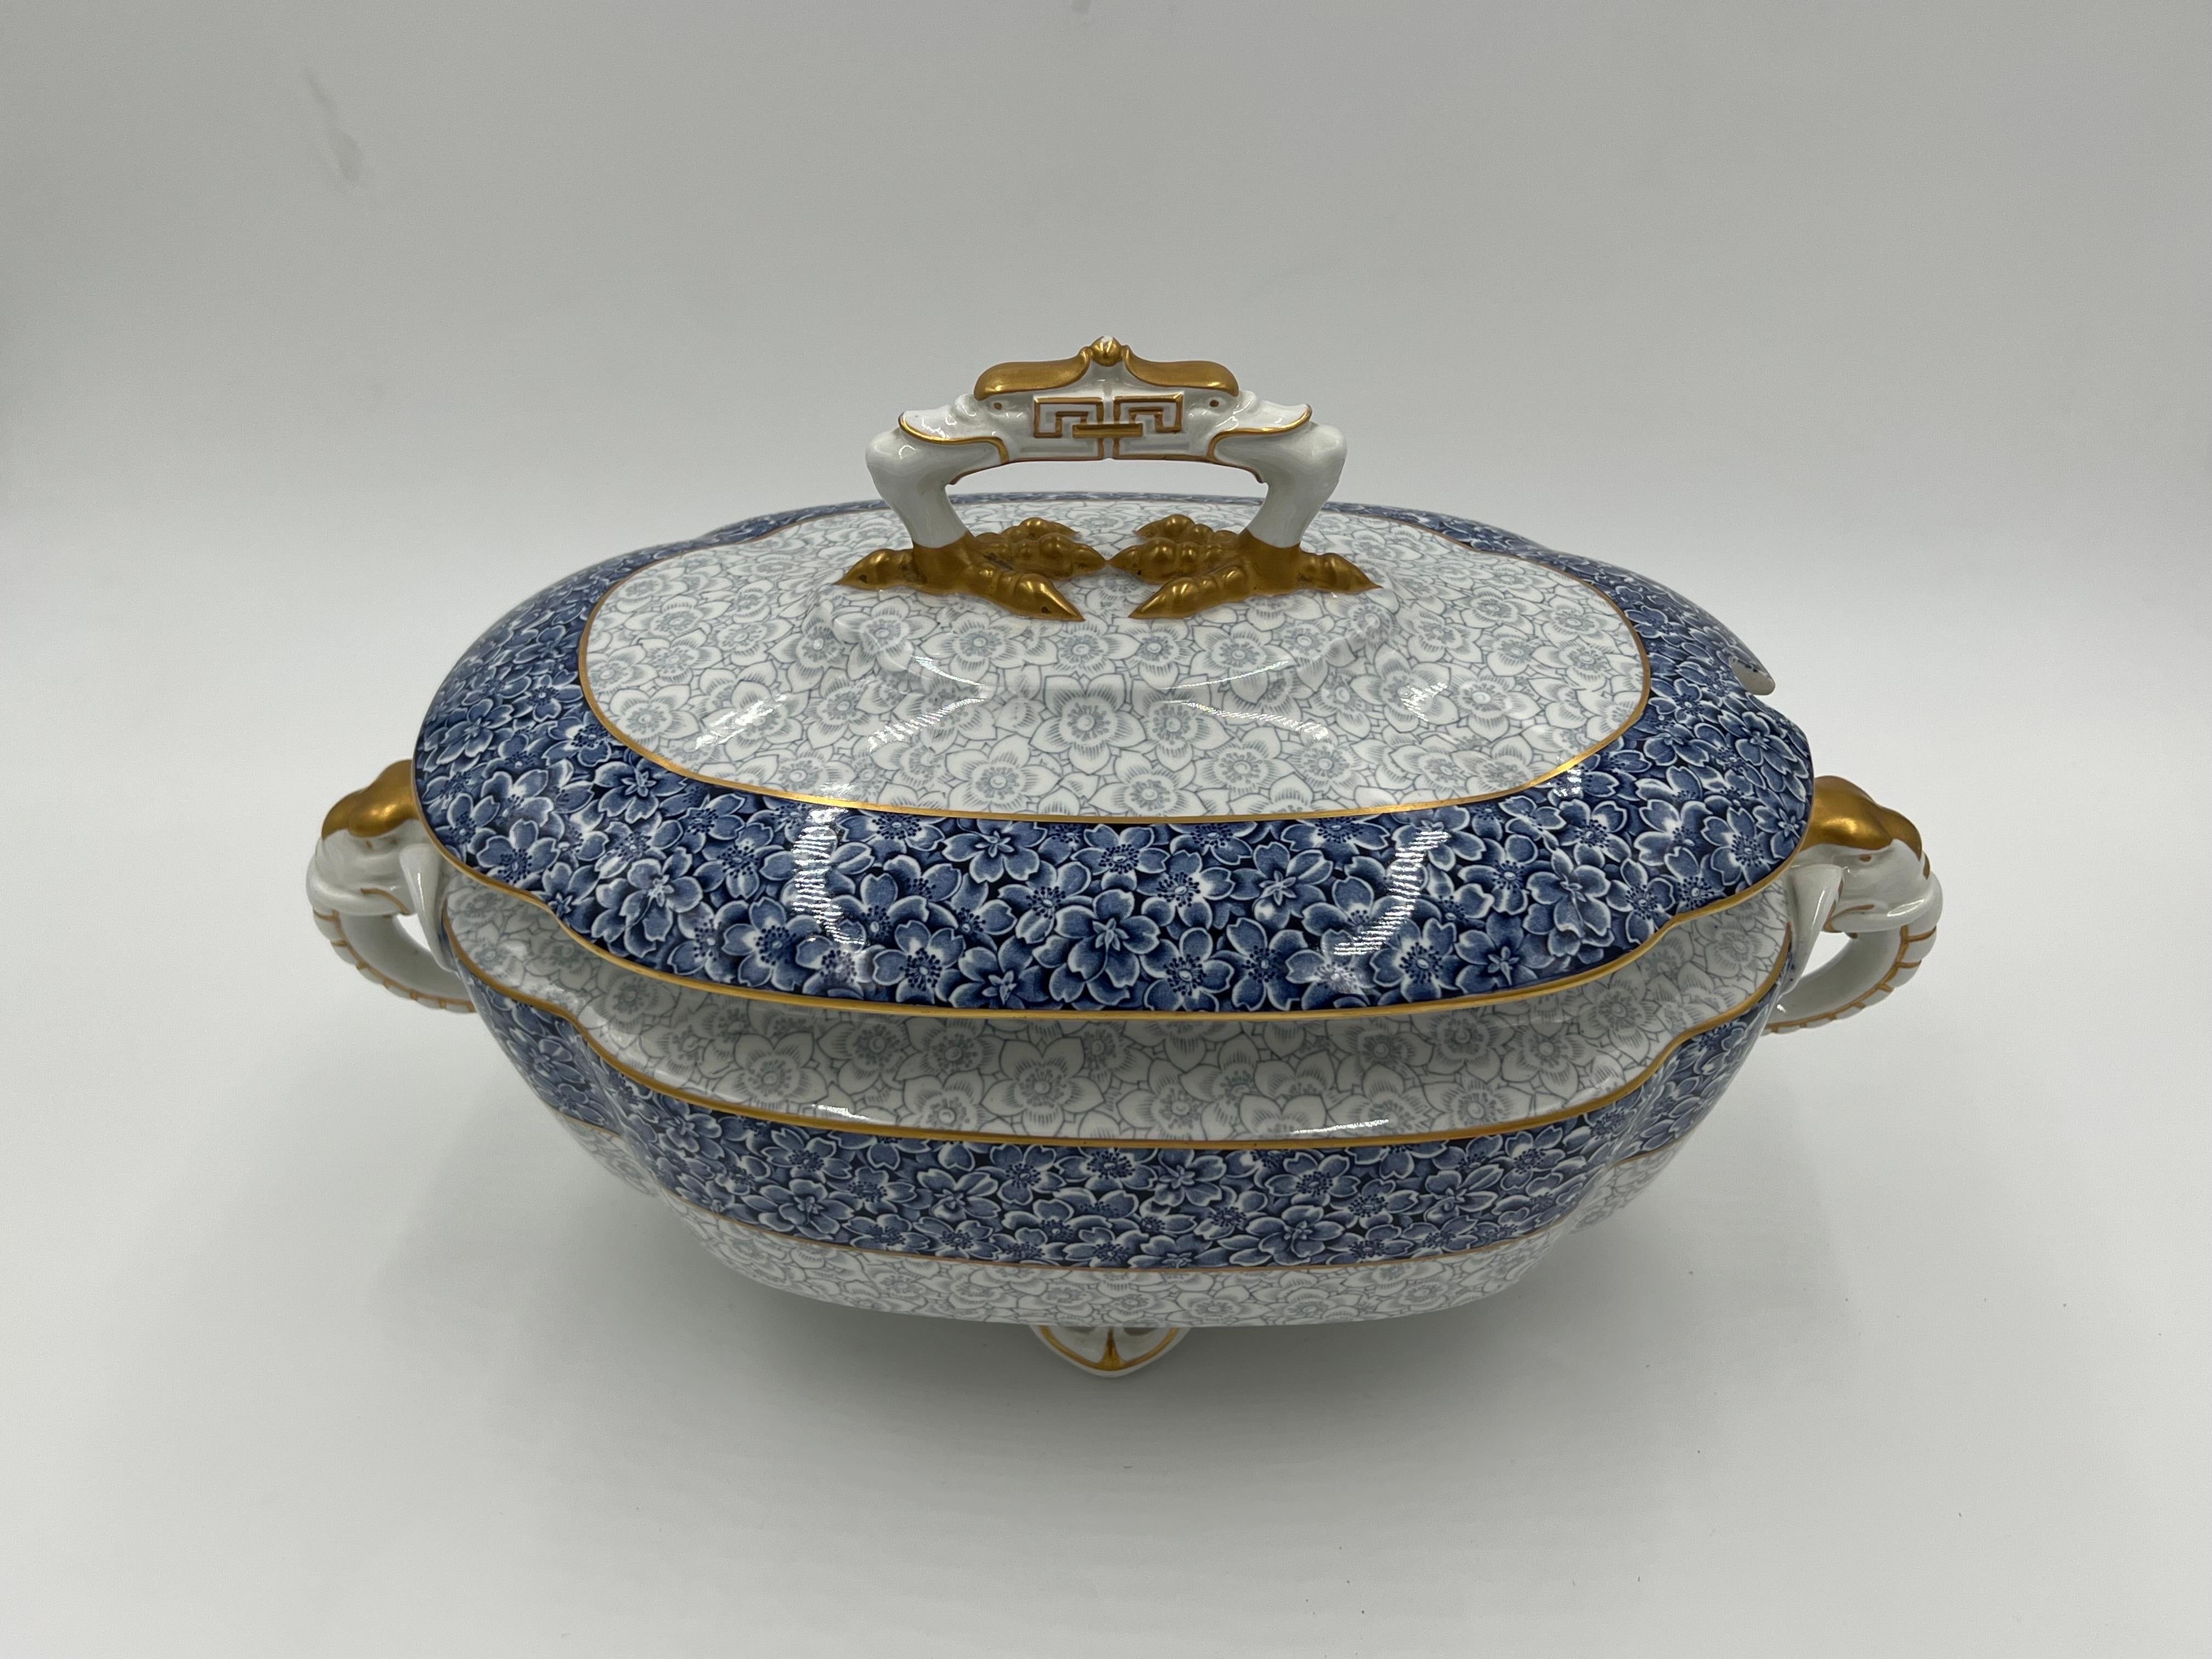 A fantastic Royal Worcester porcelain tureen with fine quality elephant handles and ostrich form foot finial handle to top. Resting on 4 feet and marked to bottom. Circa 1890.